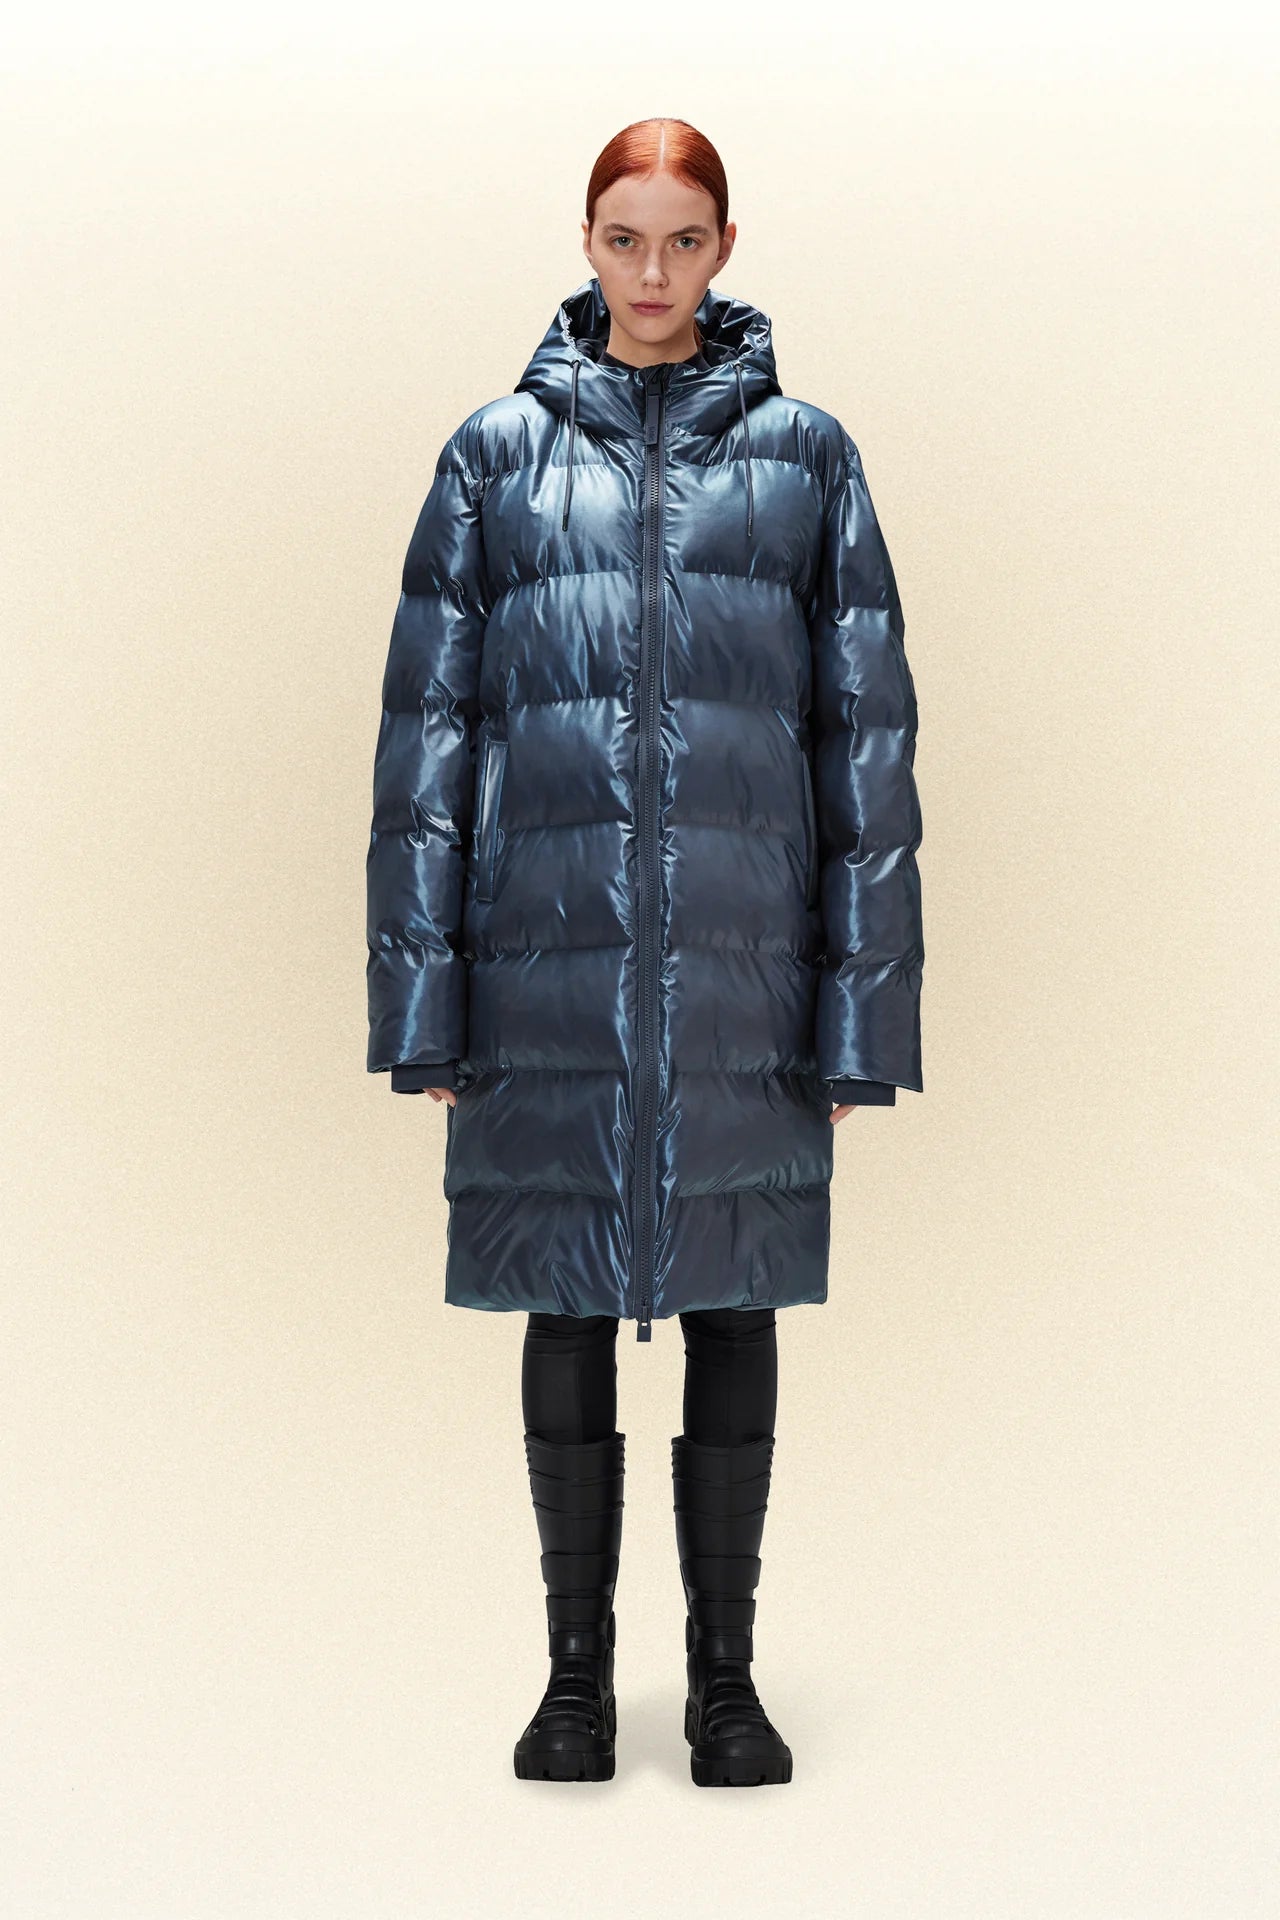 A woman is standing in a Rains Alta Long Puffer Jacket.